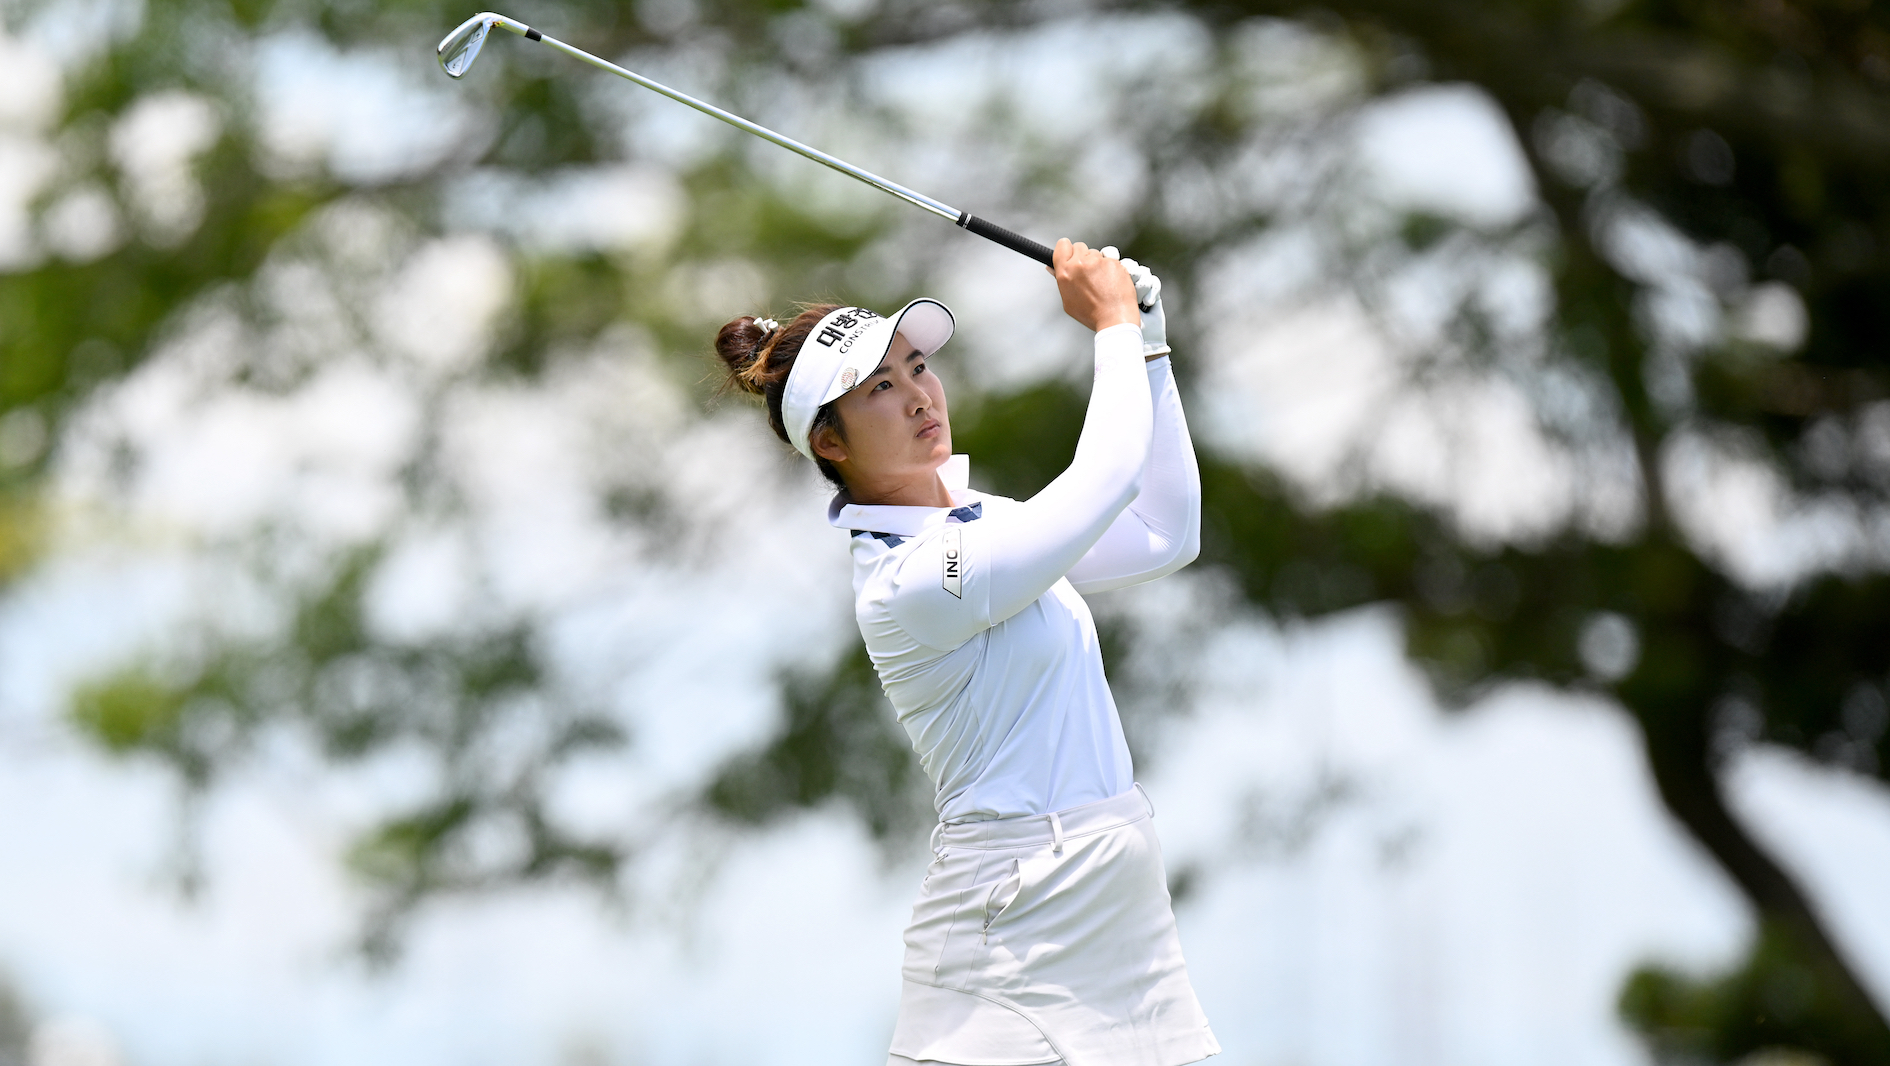 LPGA players add star power to Vic Open